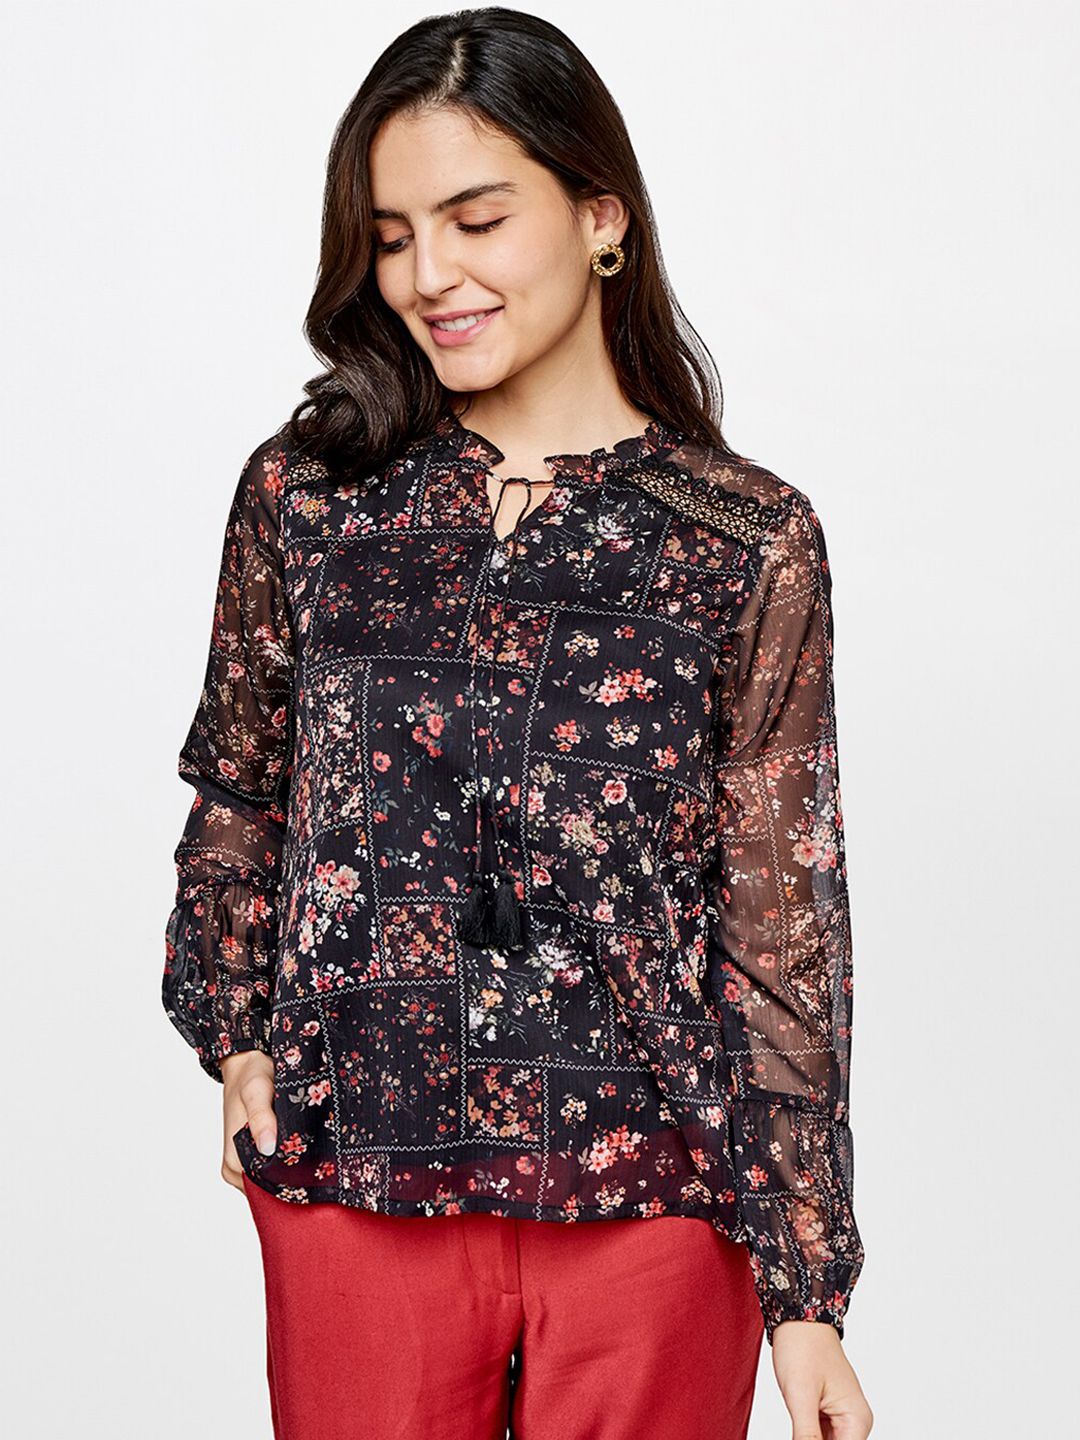 AND Women Black and Pink Floral Printed Top Price in India